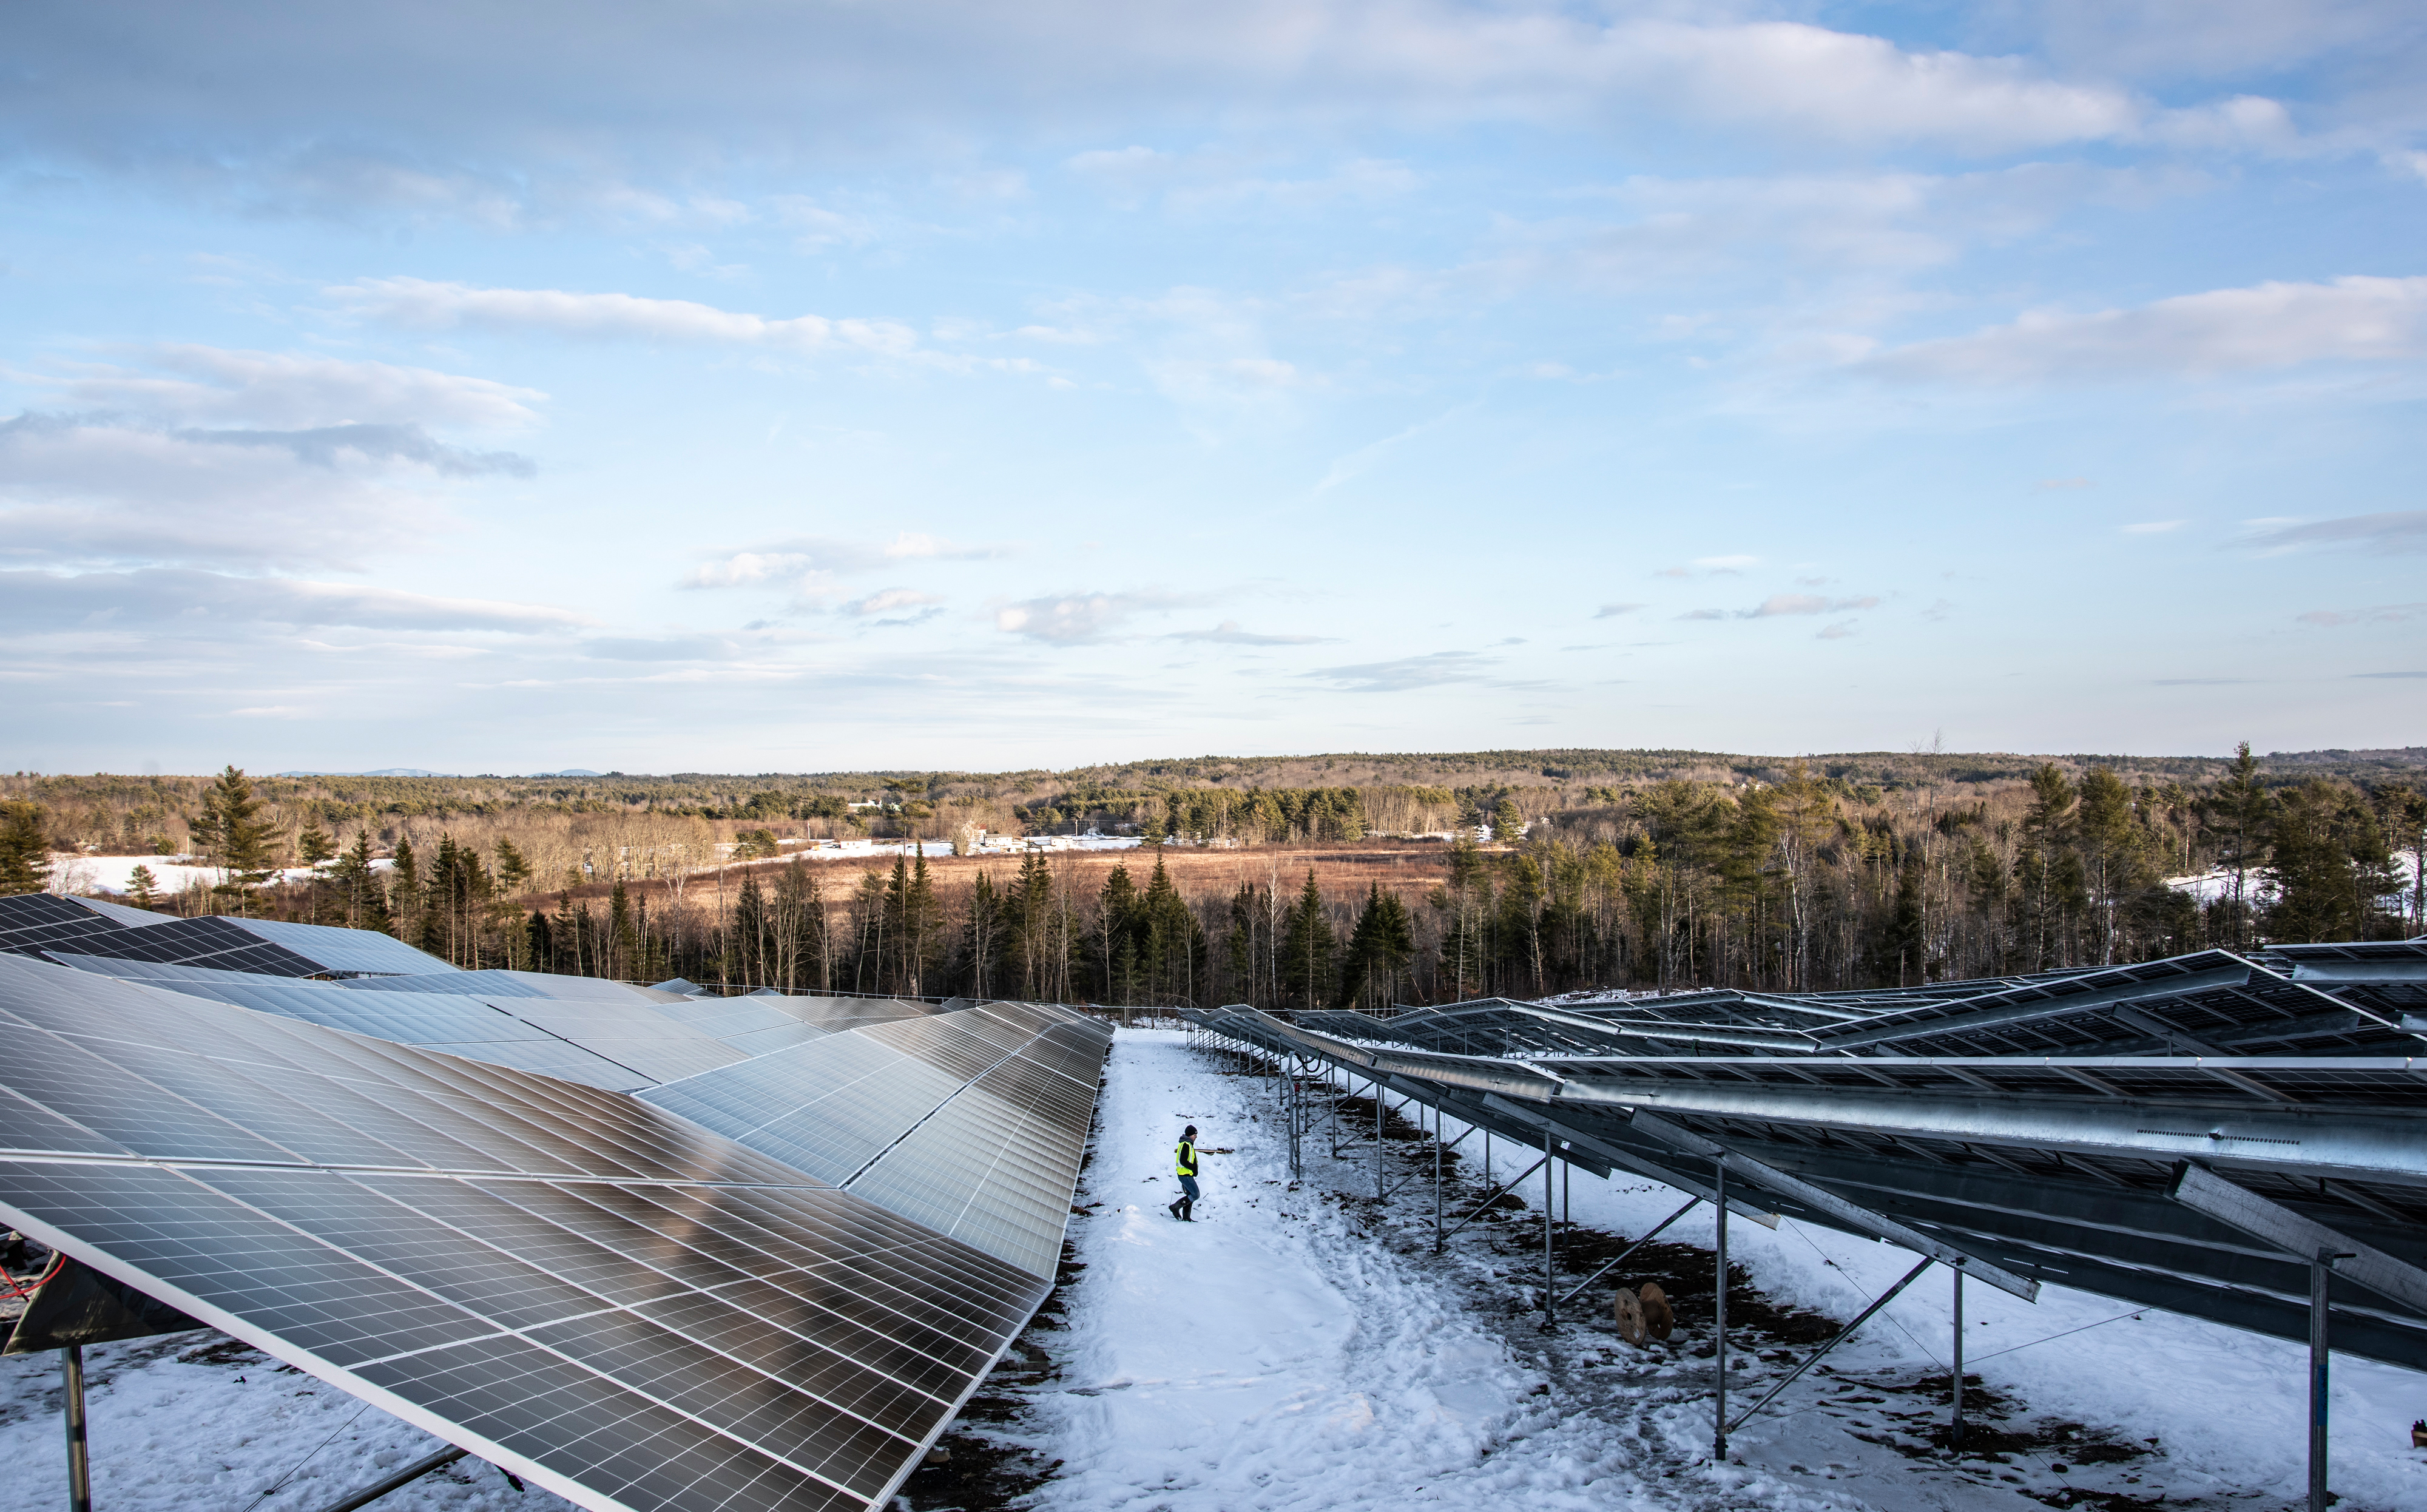 A worker walks between rows of solar panels at the SunRaise solar garden in Waldoboro on Dec. 22. About 60 people worked on the construction of the site. (Bisi Cameron Yee photo)